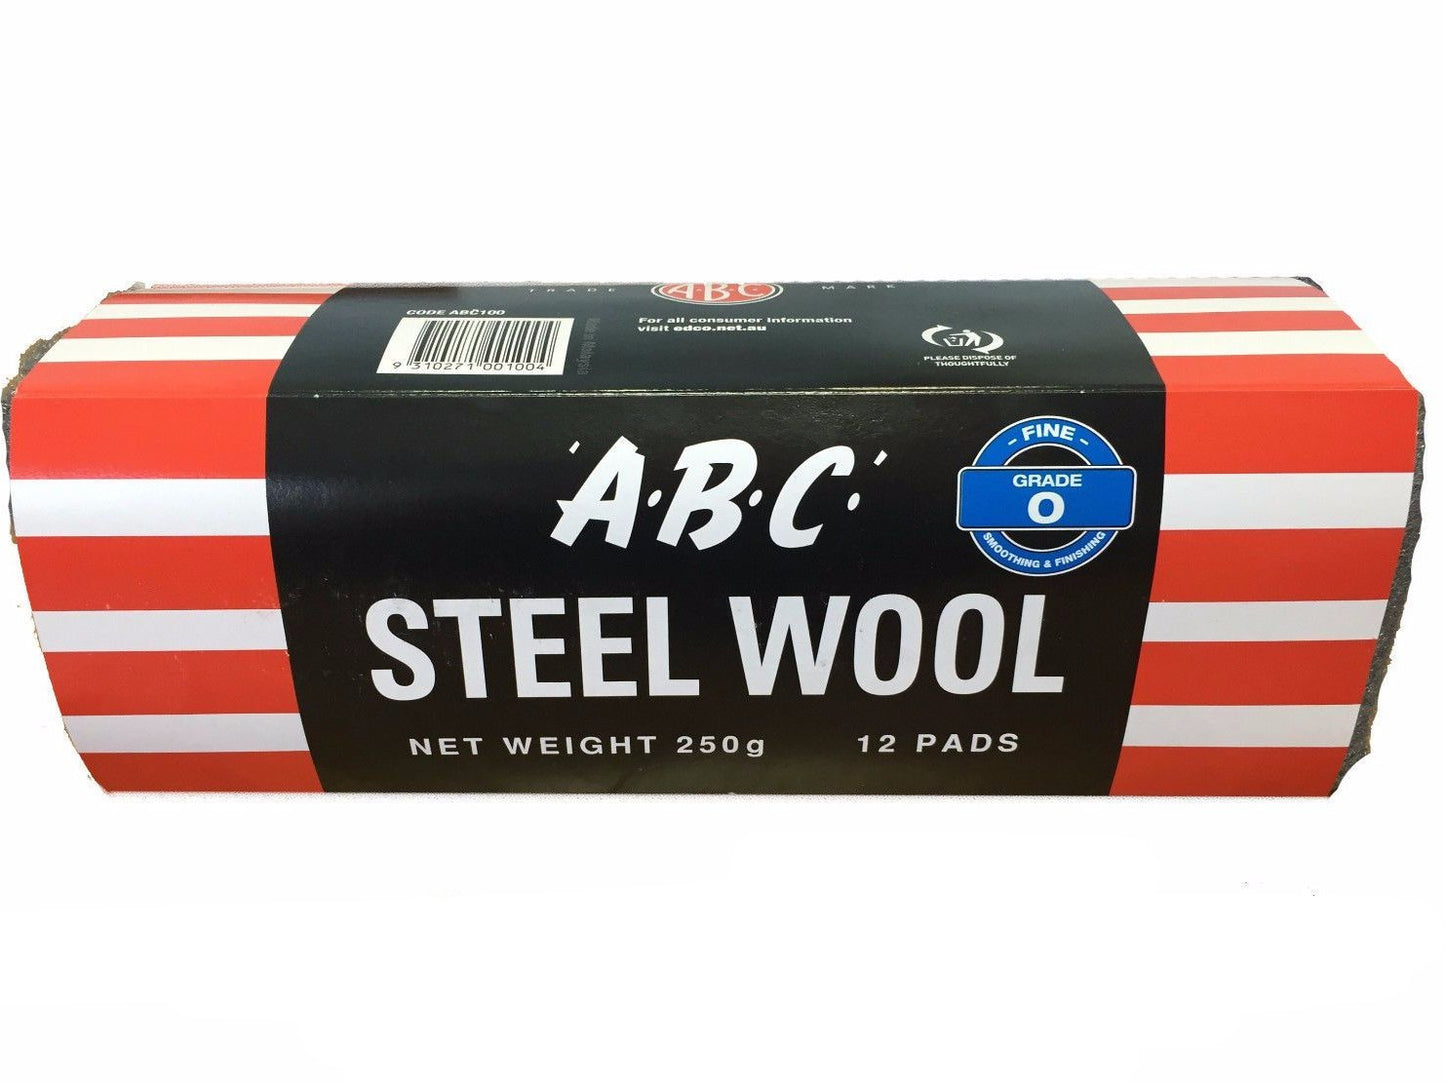 EDCO ABC Steel Wool Fine Grade 0 Smoothing & Finishing 250g Pack x 12 Pads